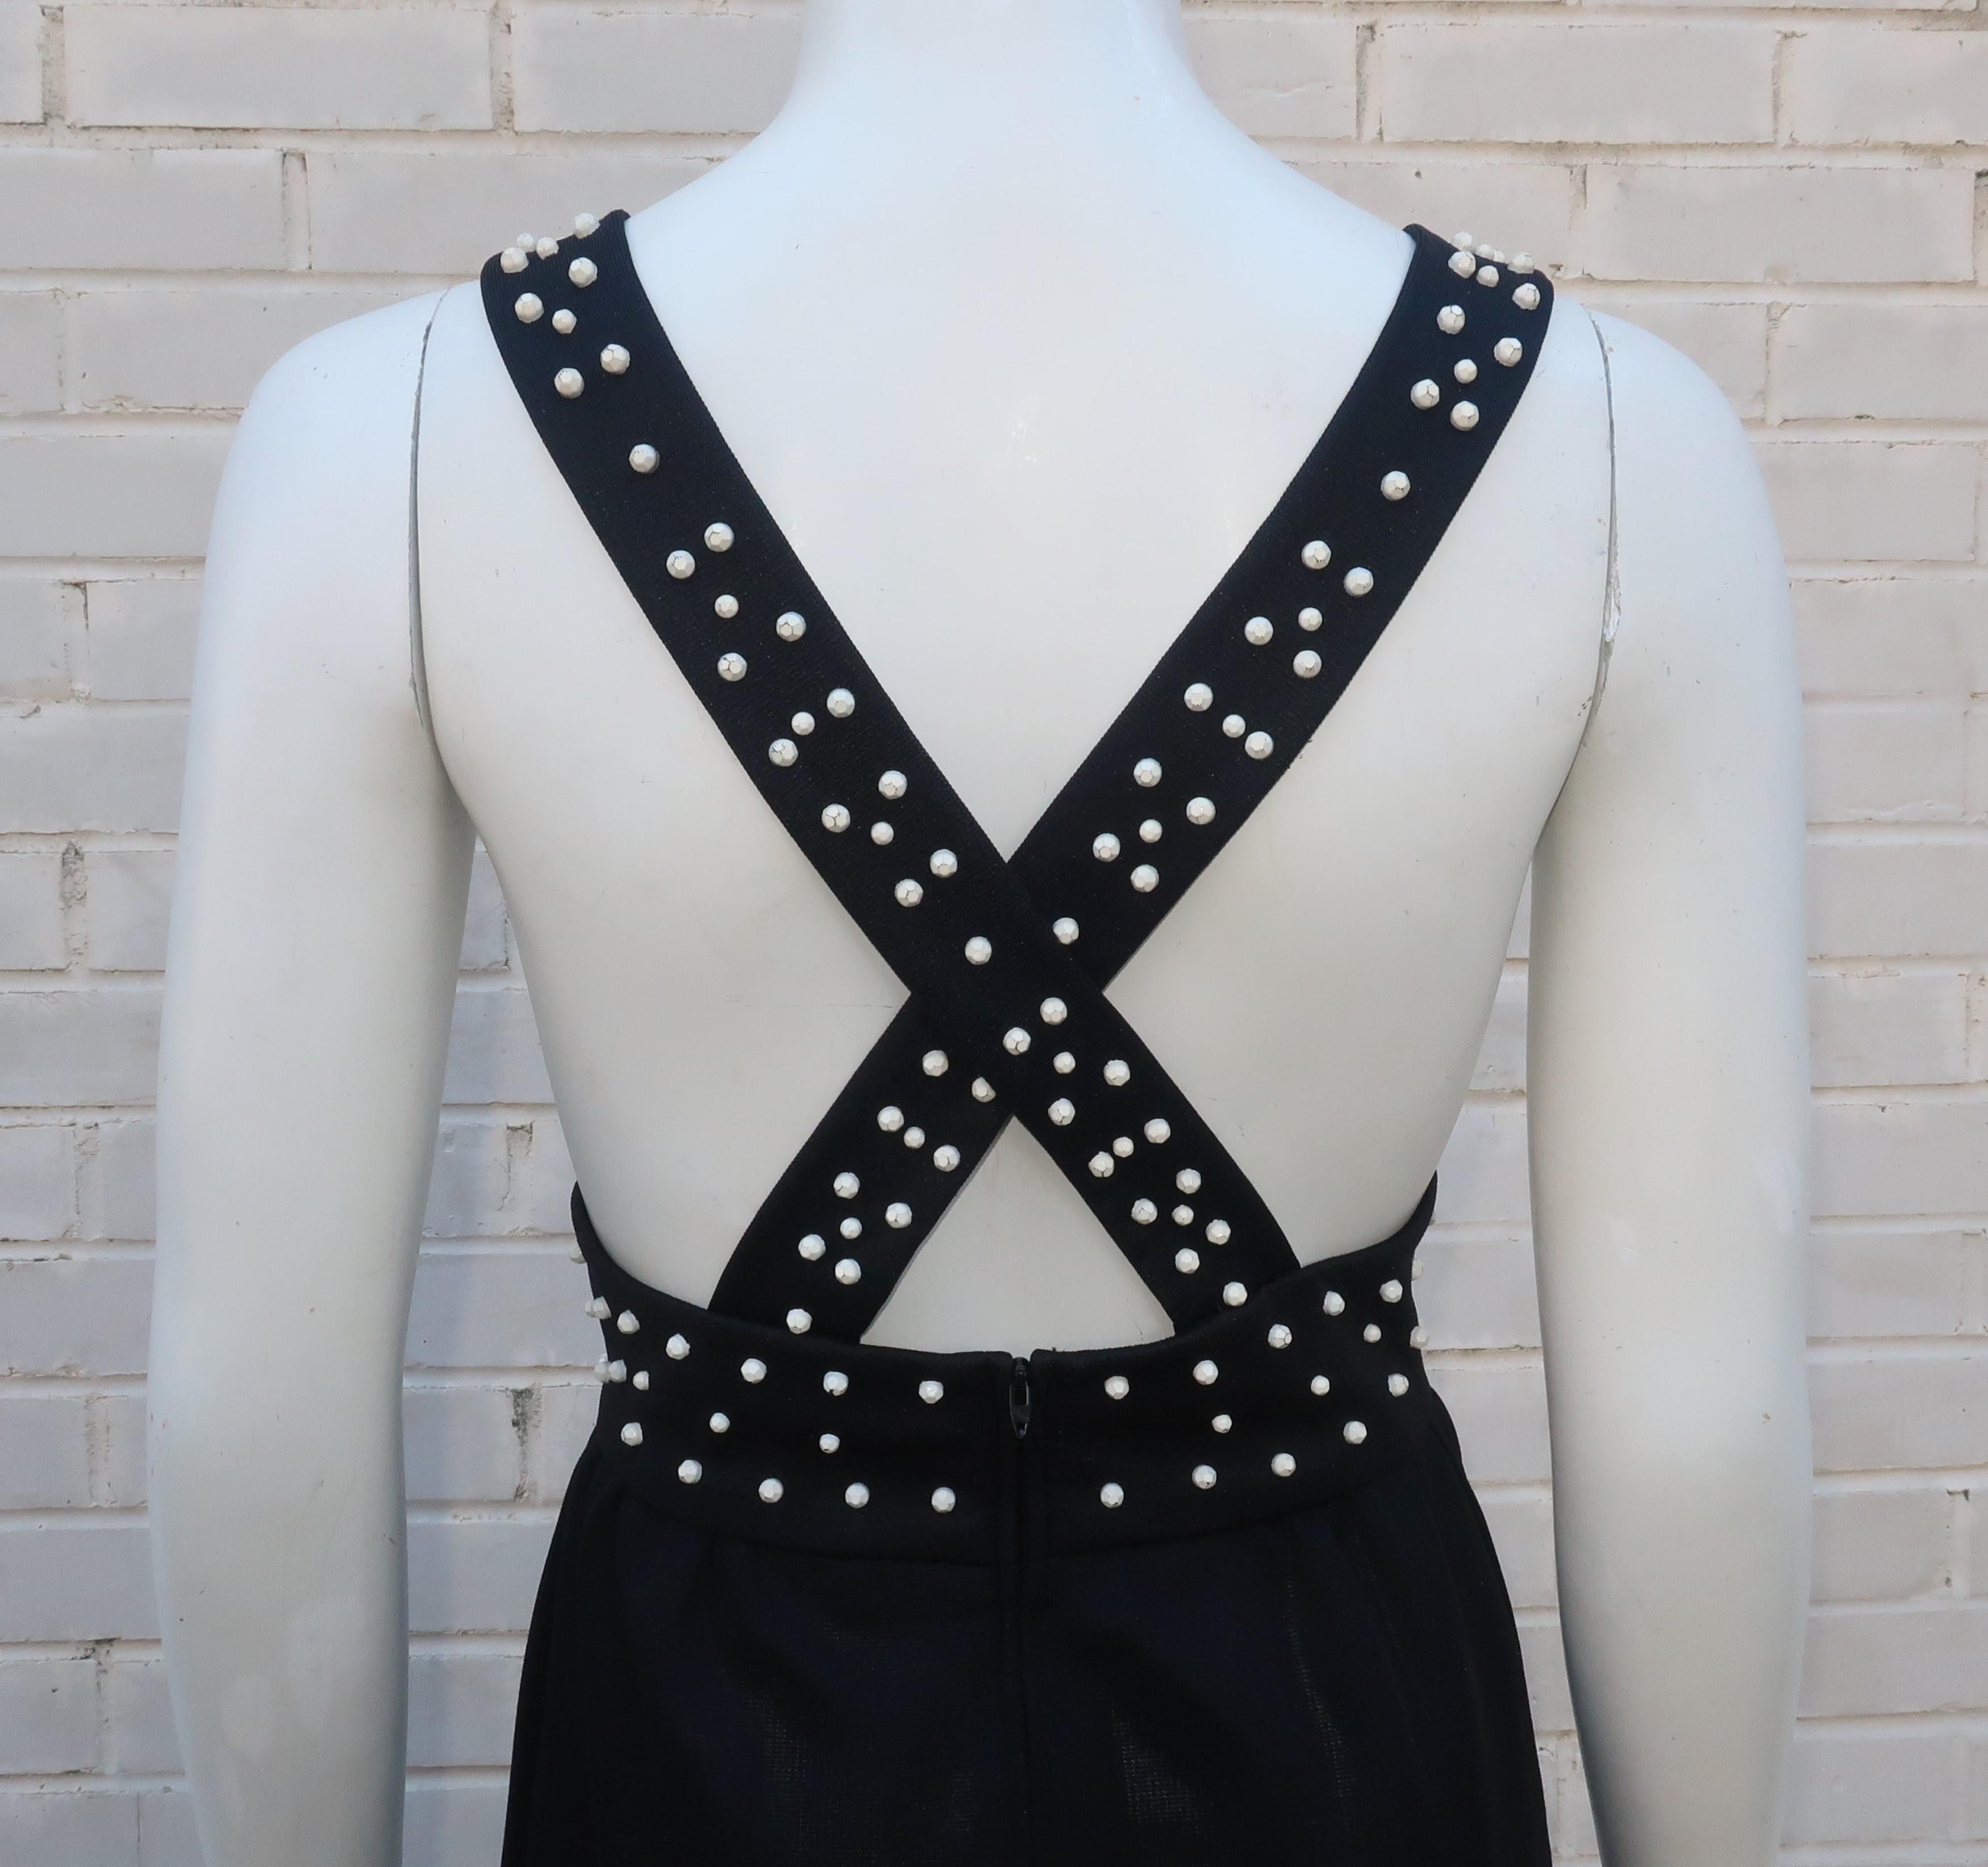 Black Maxi Jumper Dress With Mod Flower Studs, 1960's For Sale 4